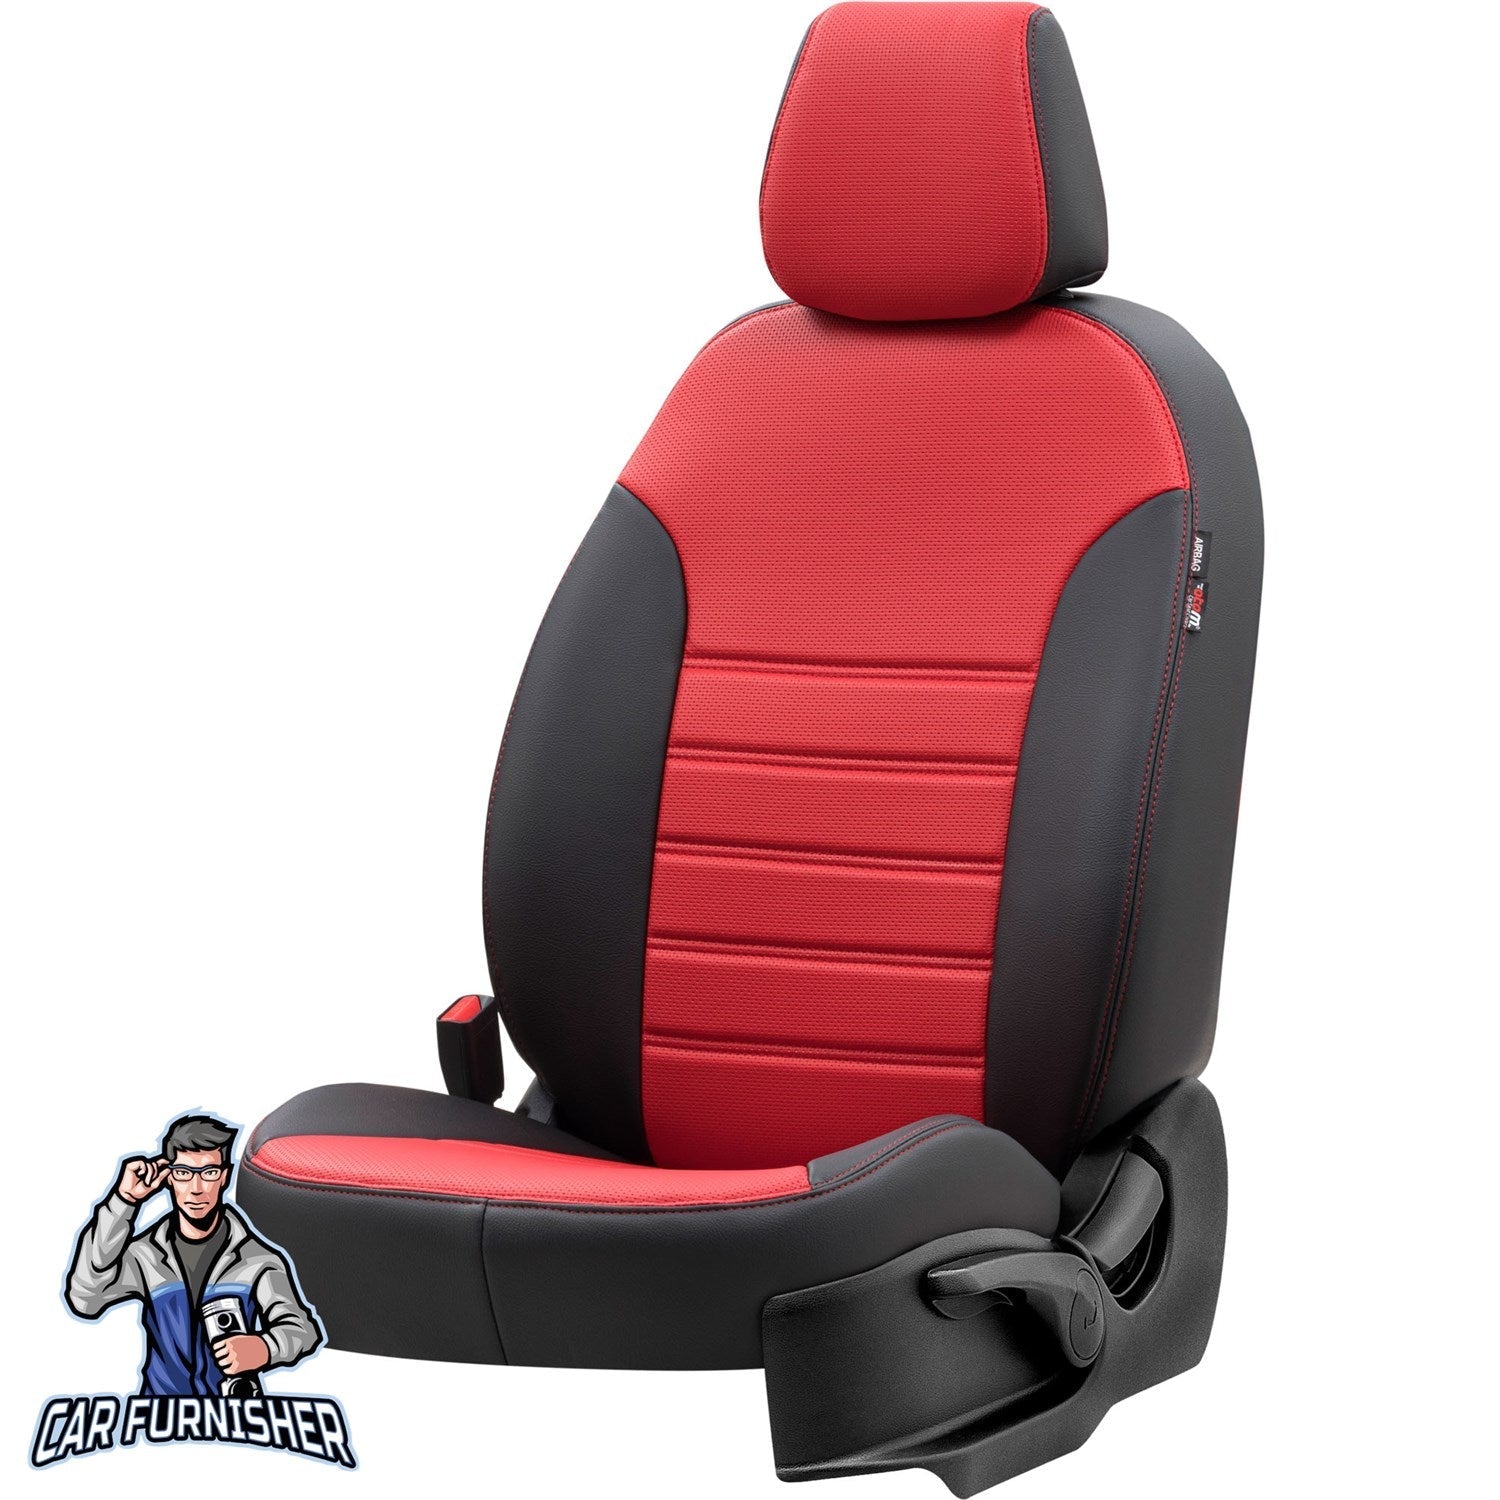 Peugeot Rifter Seat Covers New York Leather Design Red Leather